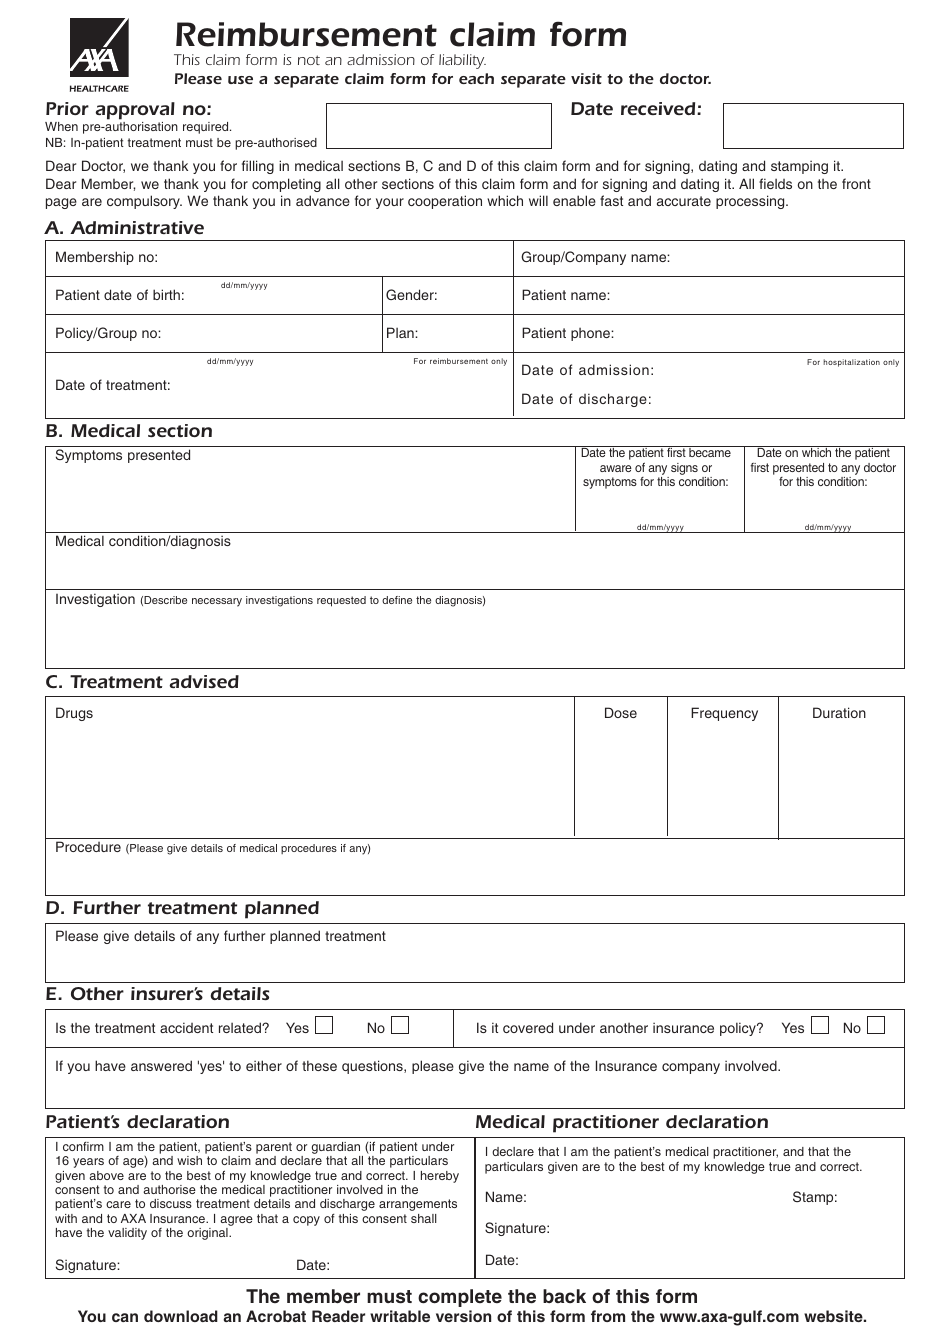 reimbursement-claim-form-axa-healthcare-fill-out-sign-online-and